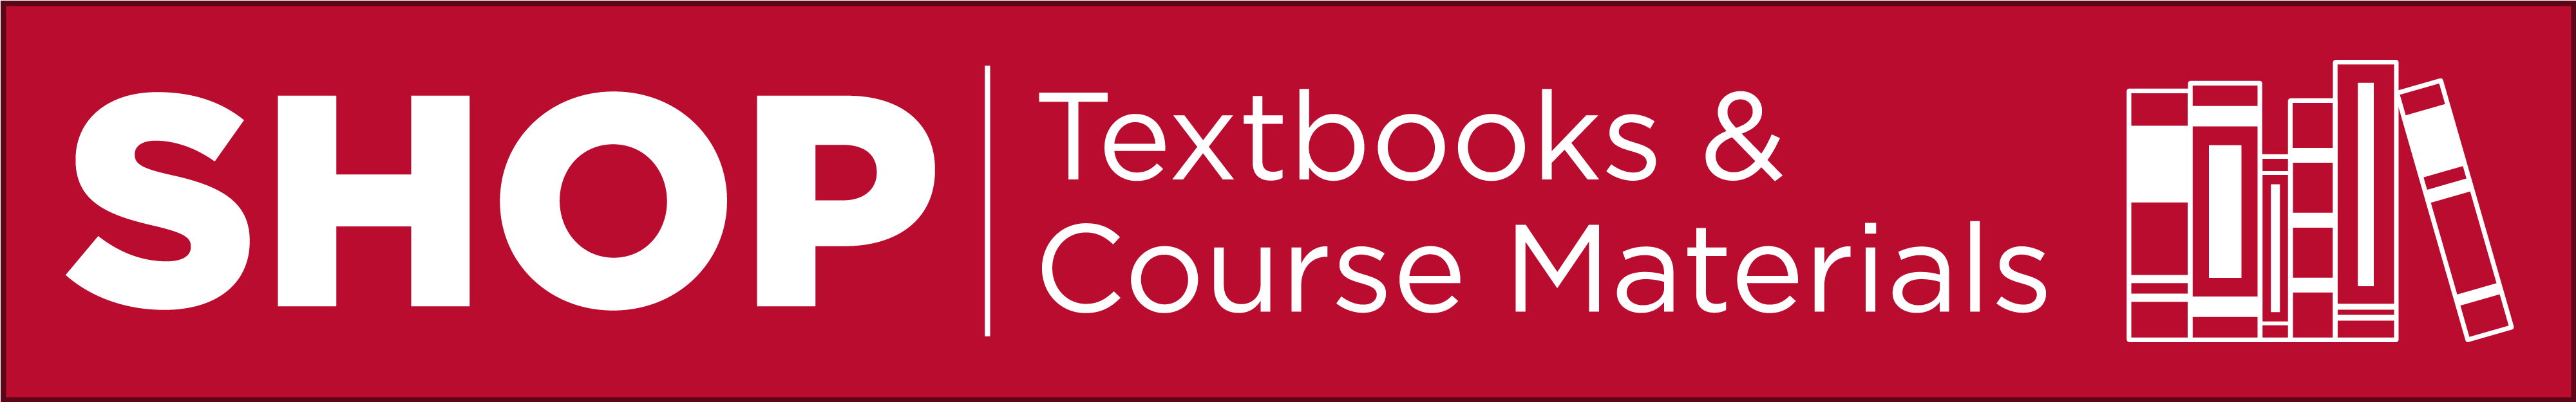 Click to shop textbooks and course materials